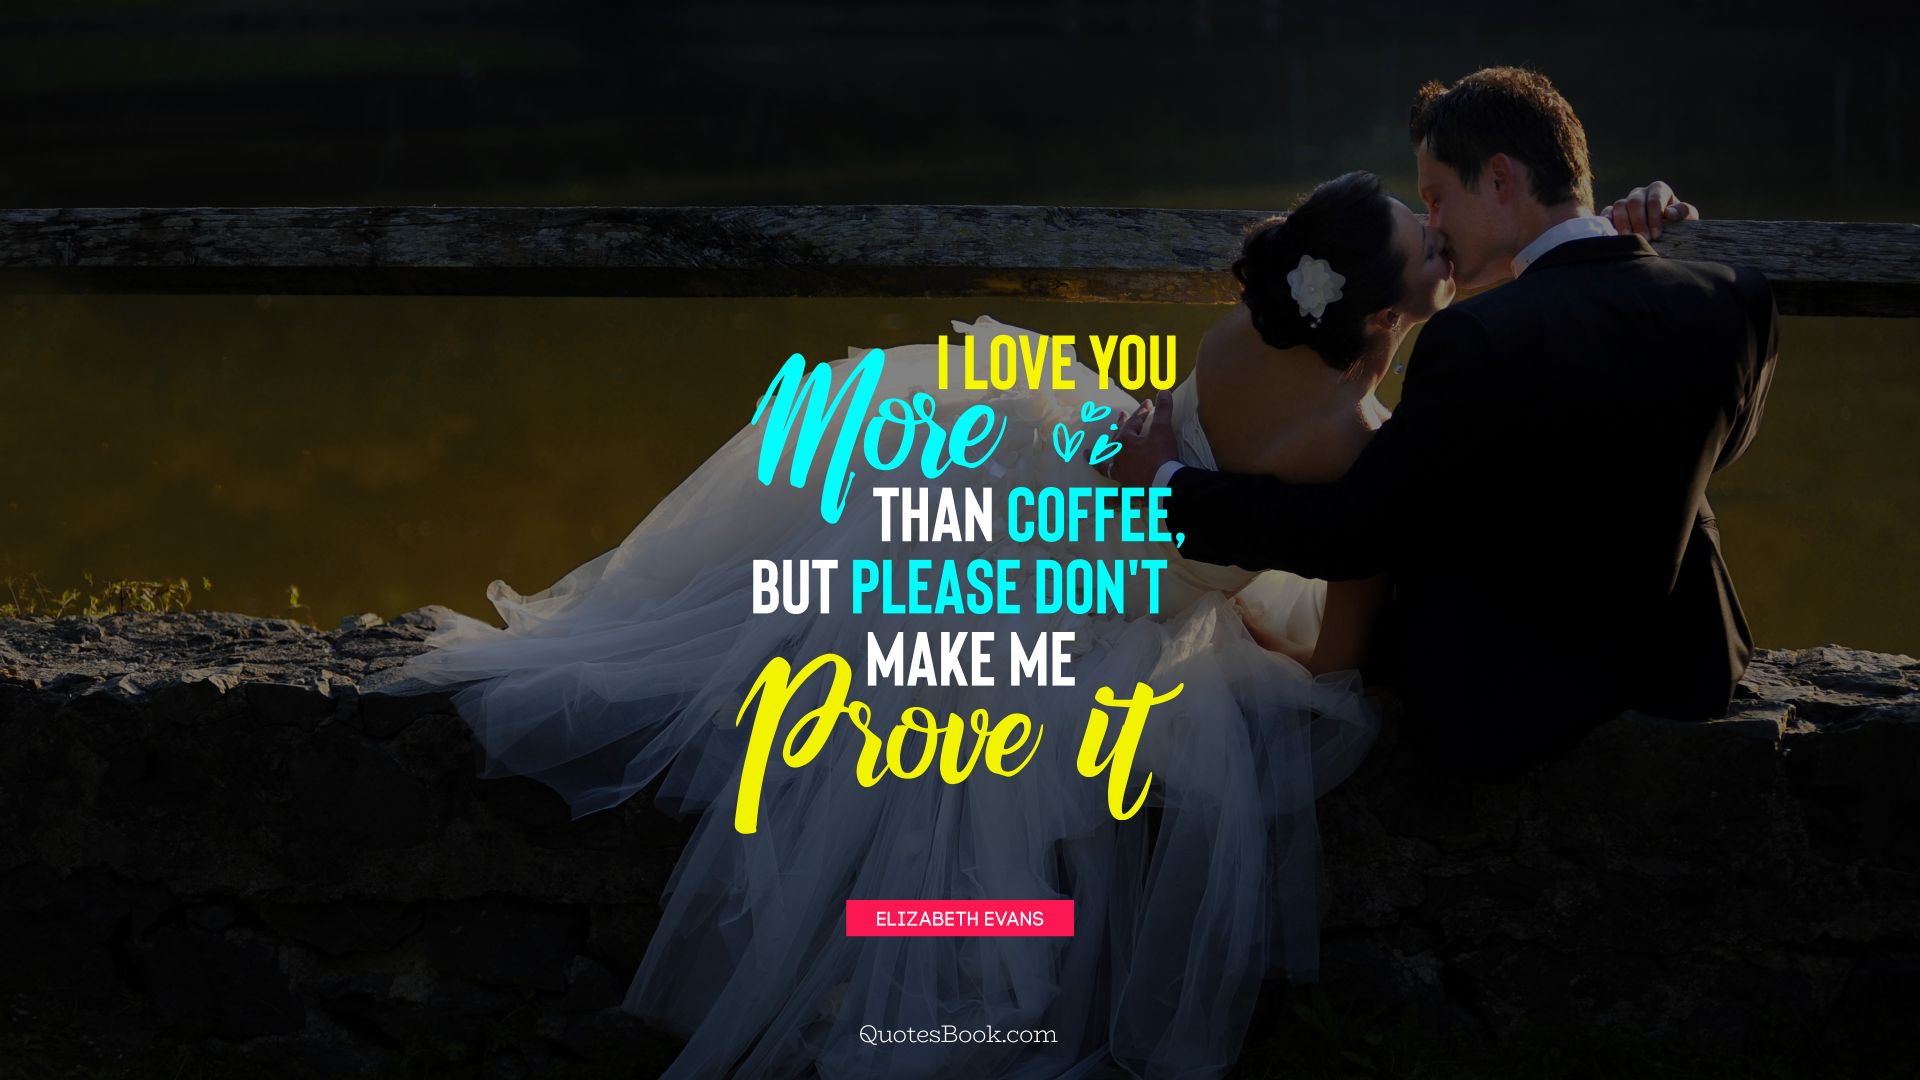 I love you more than coffee, but please don't make me prove it. - Quote by Elizabeth Evans